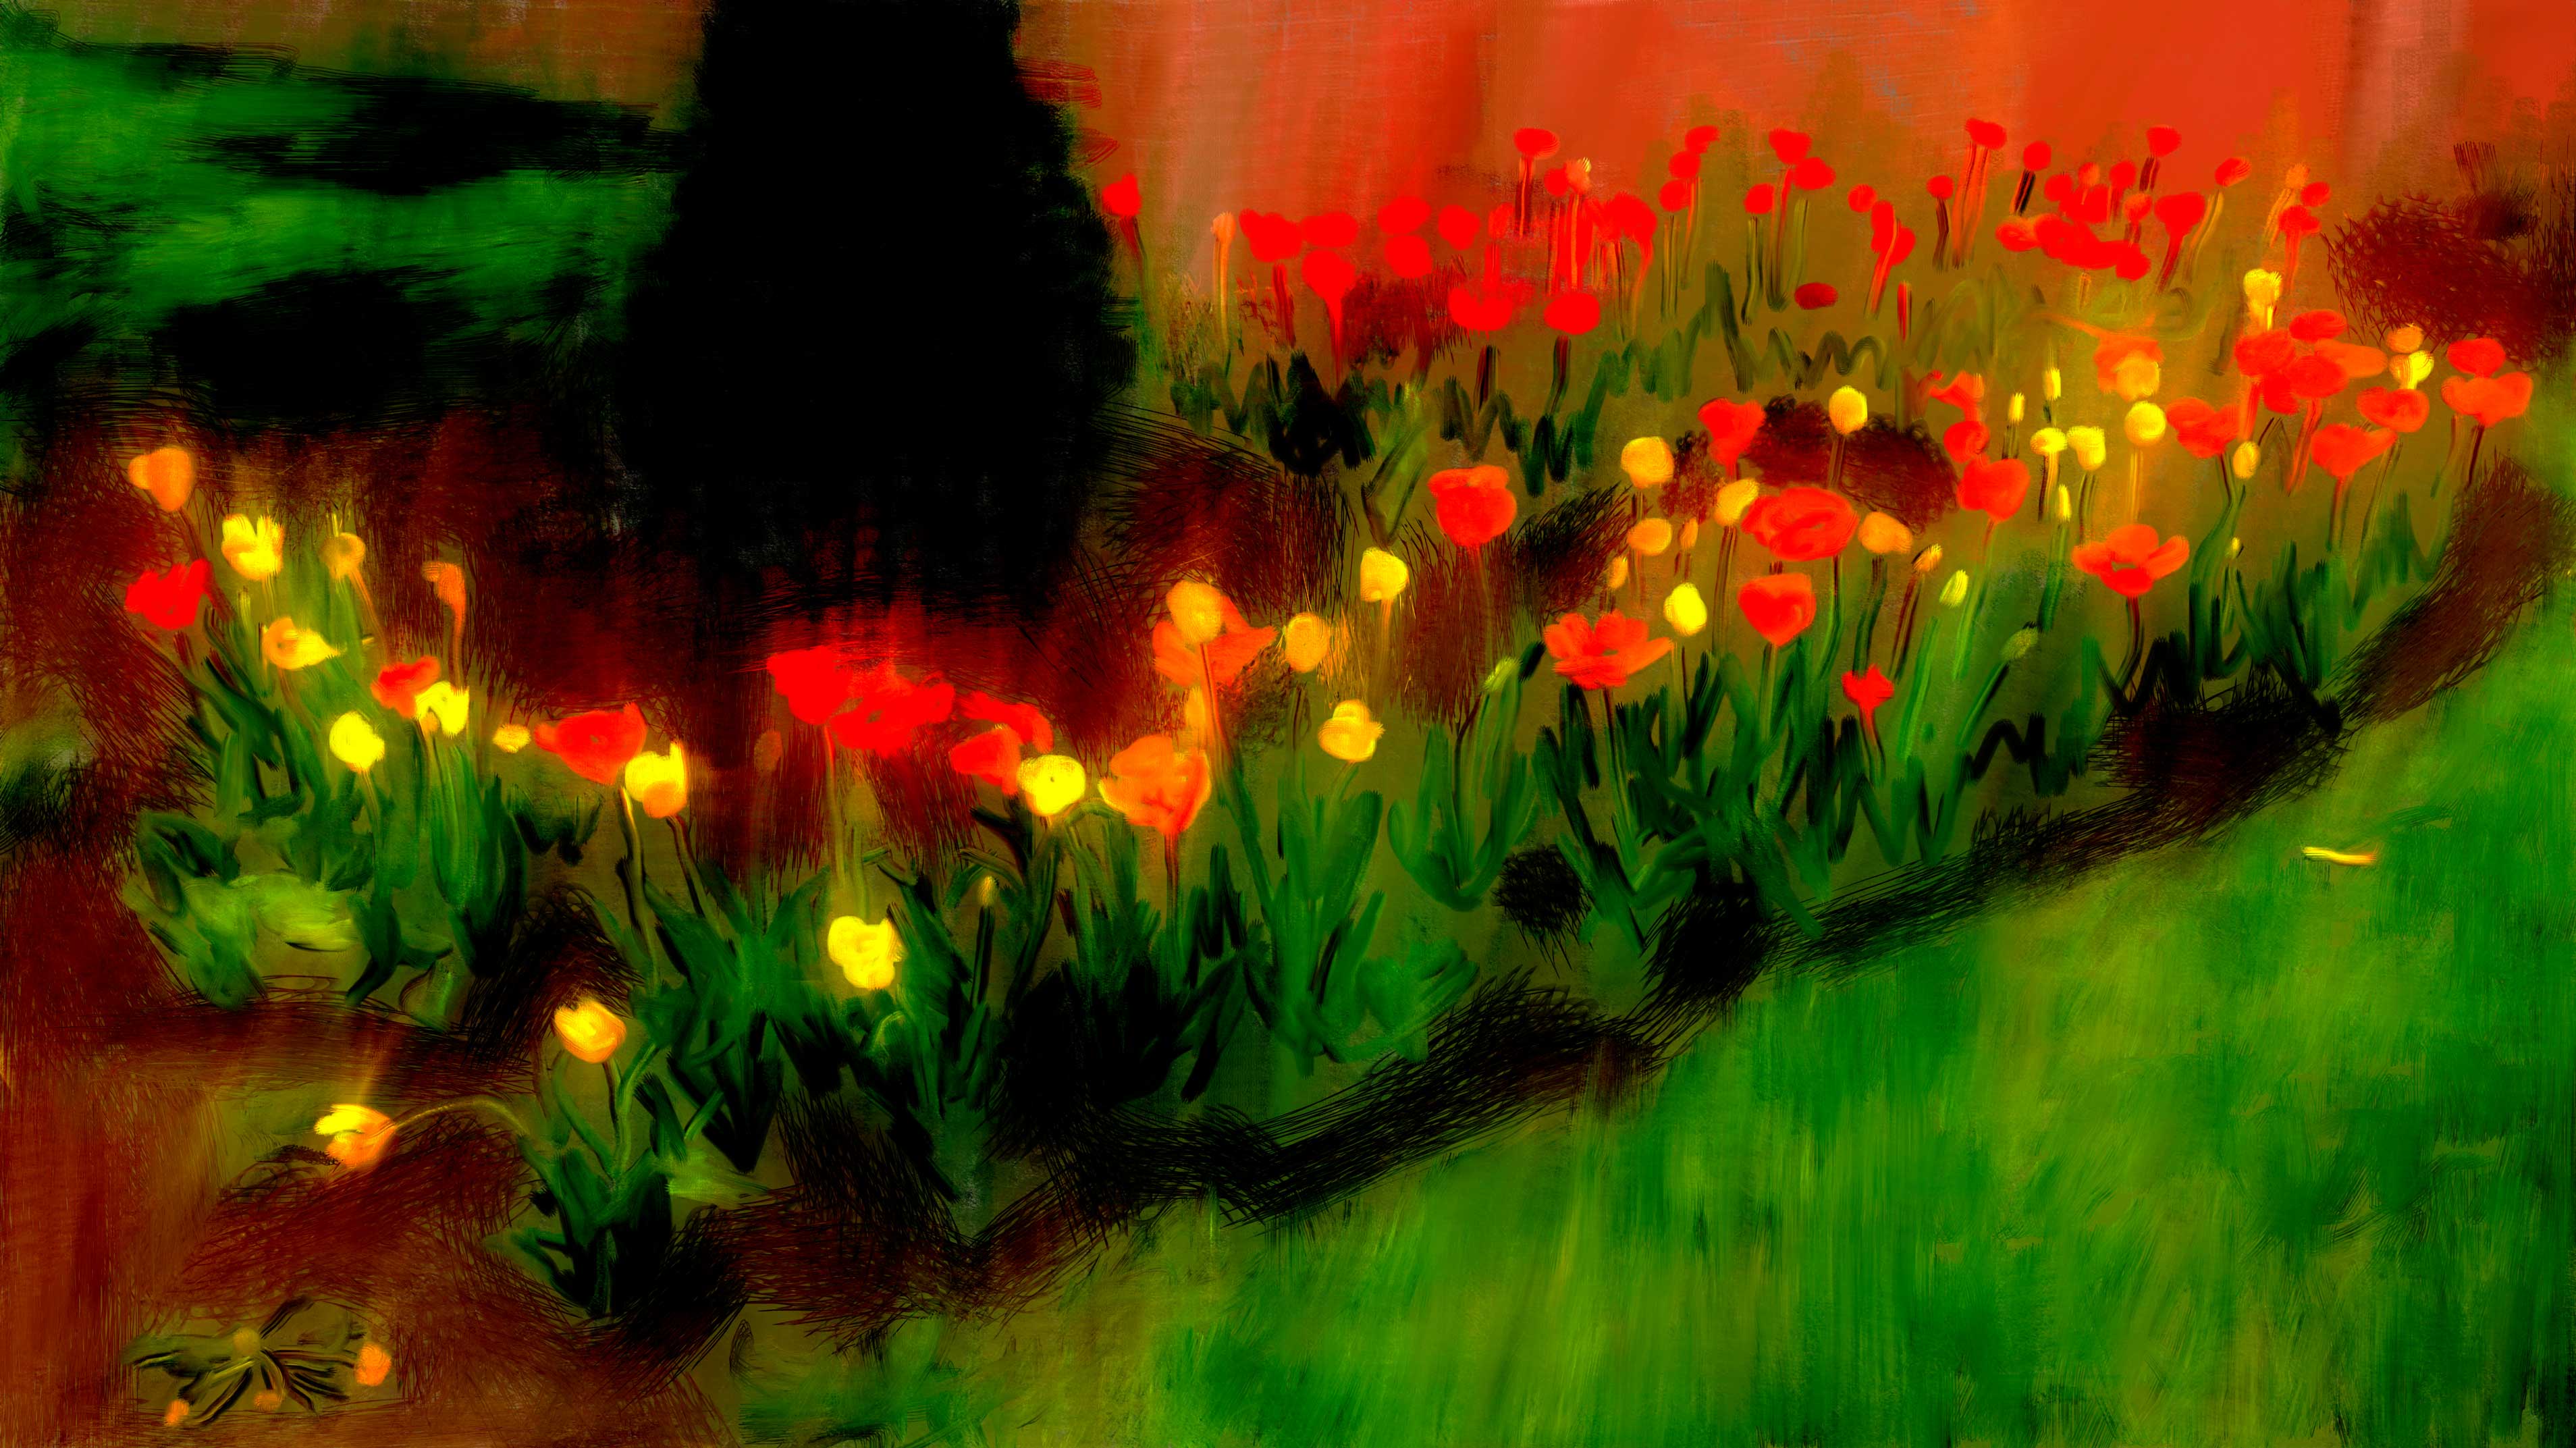 An abstract painting of red and yellow flowers on the University of Dubuque campus. In the background is a tree and brick building and the painting itself was done in photoshop.